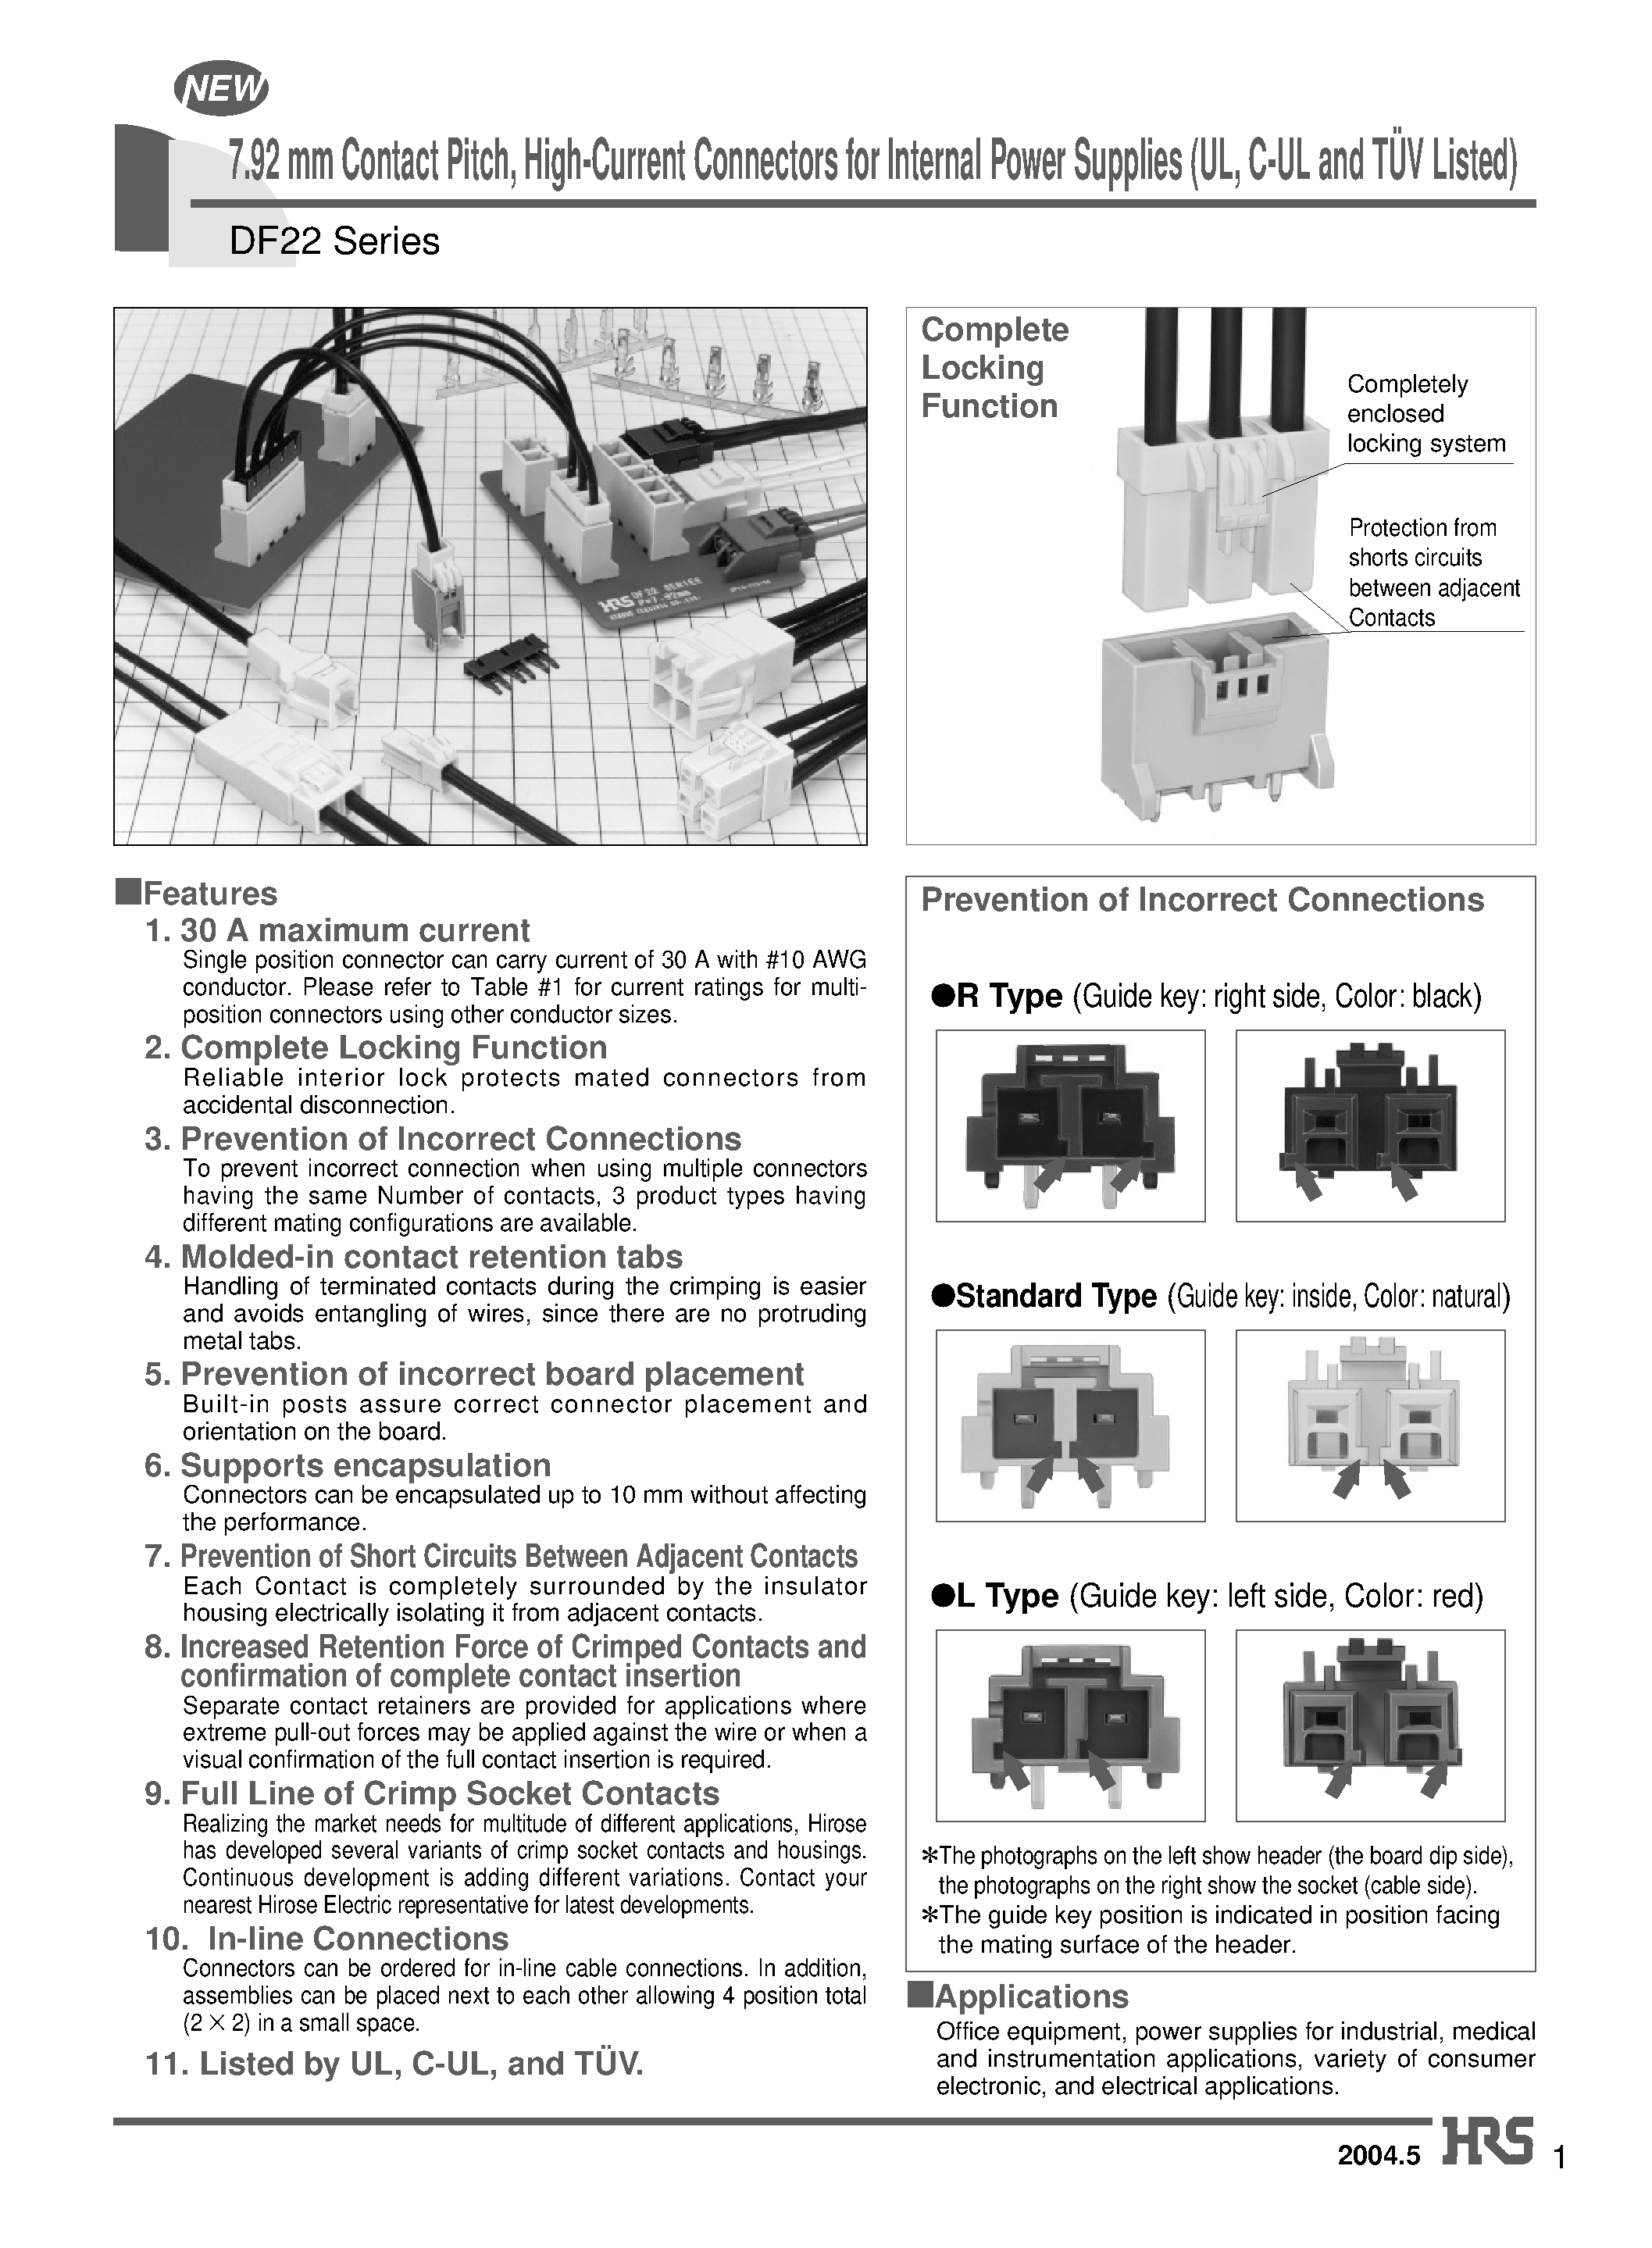 Datasheet DF22A-4P-7.92C - 7.92 mm Contact Pitch/ High-Current Connectors for Internal Power Supplies (UL/ C-UL and TUV Listed) page 1